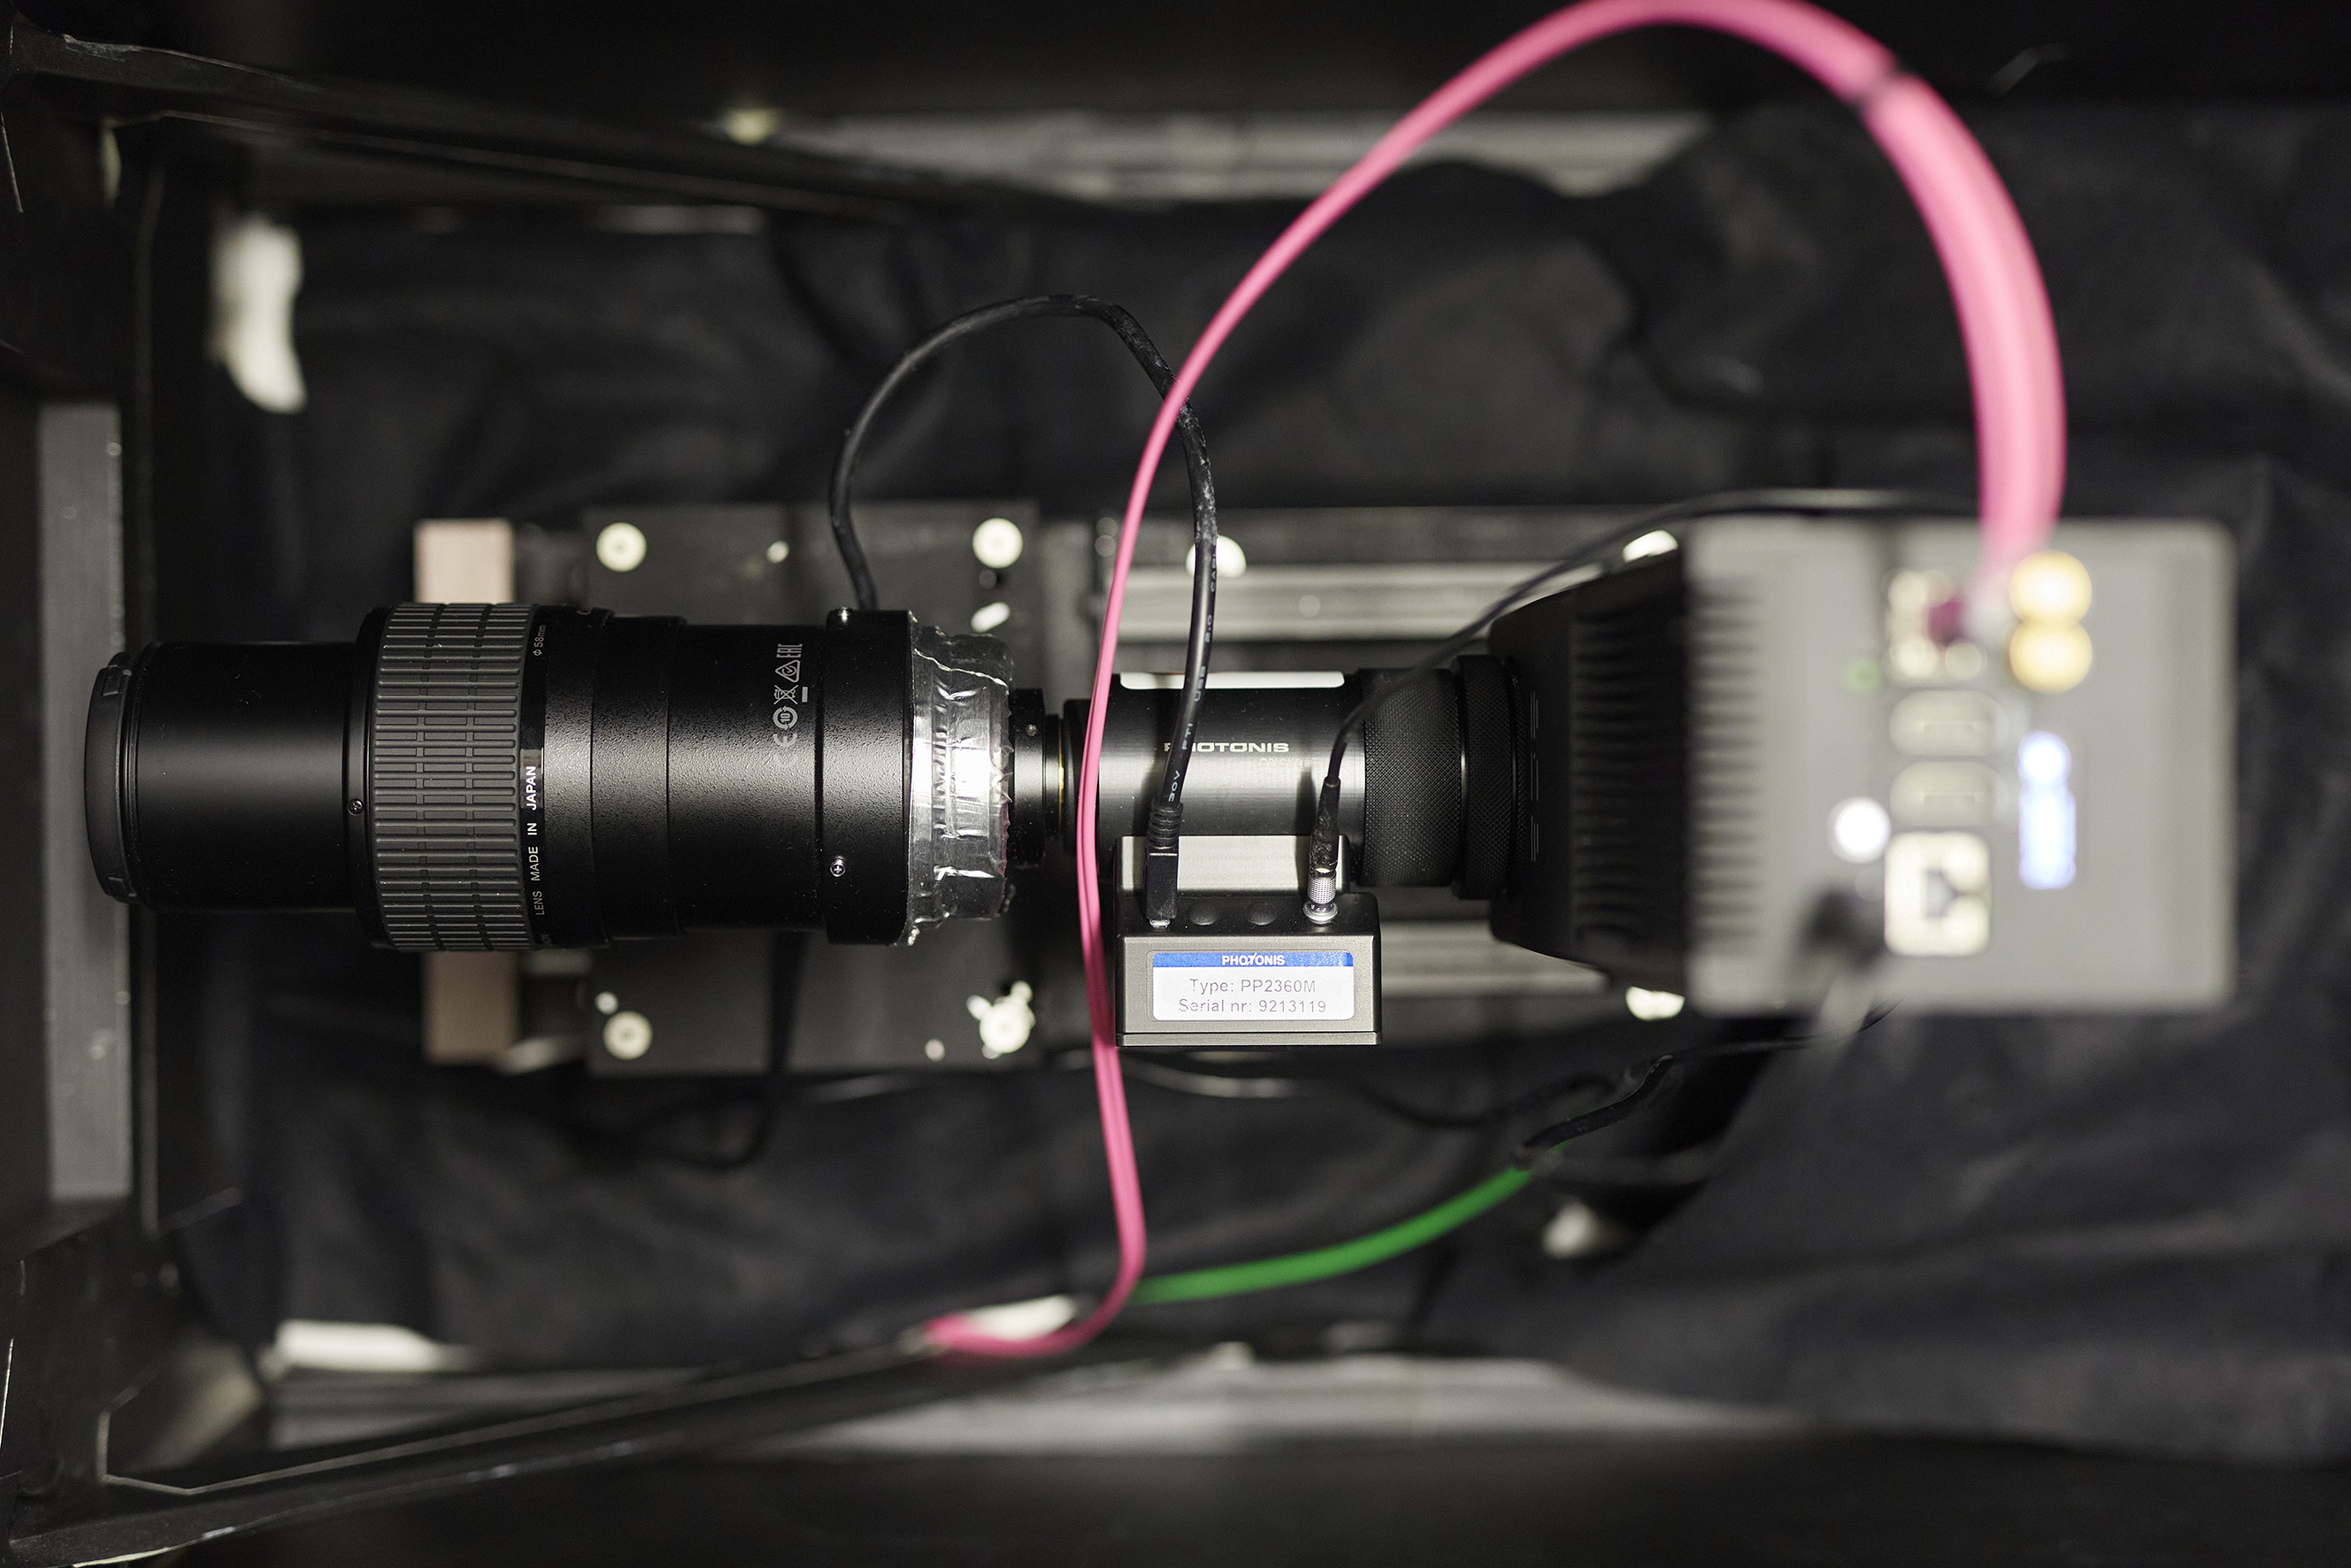 Camera with image intensifier and zoom lens. The pink cable sends the signals of up to 80 million activated pixels per second to a high-performance PC for data analysis.